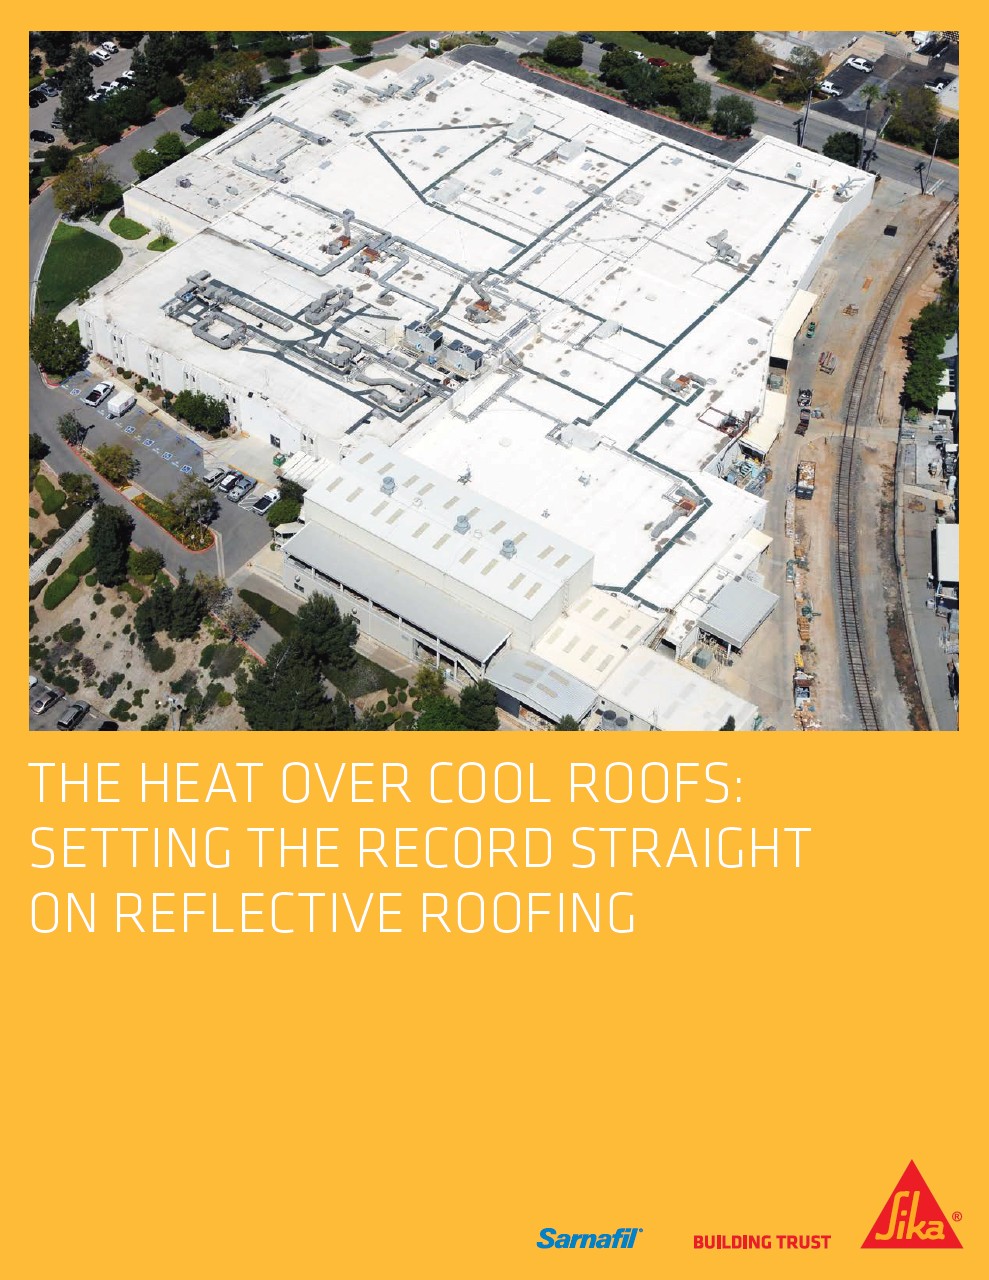 Heat over cool roofs